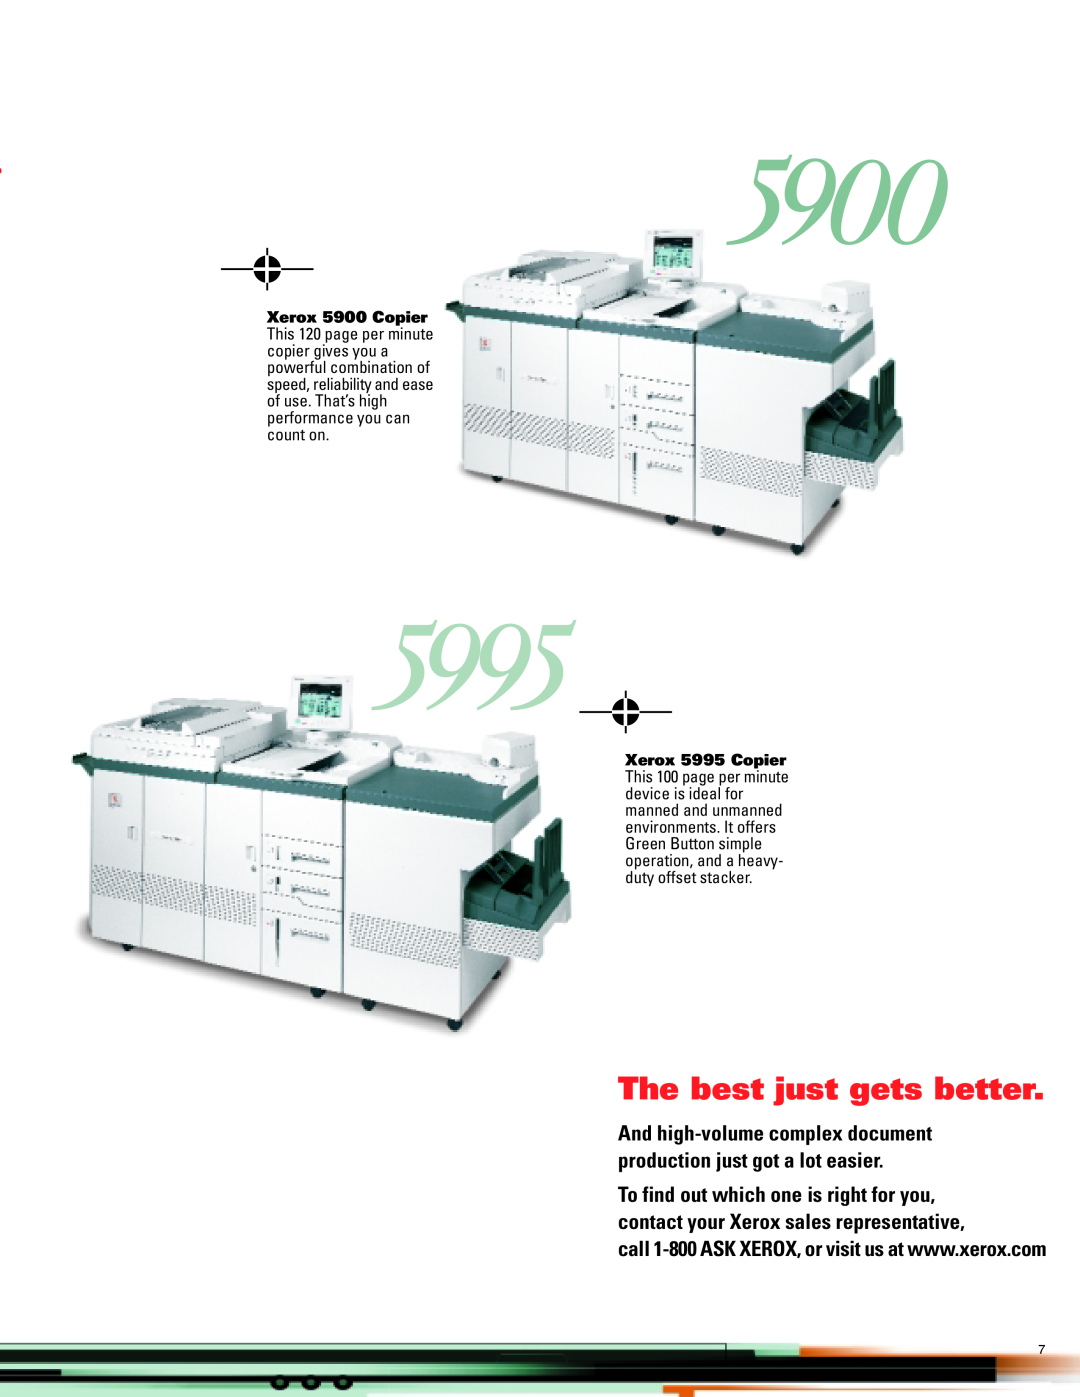 Xerox 5900 manual 5995, The best just gets better 